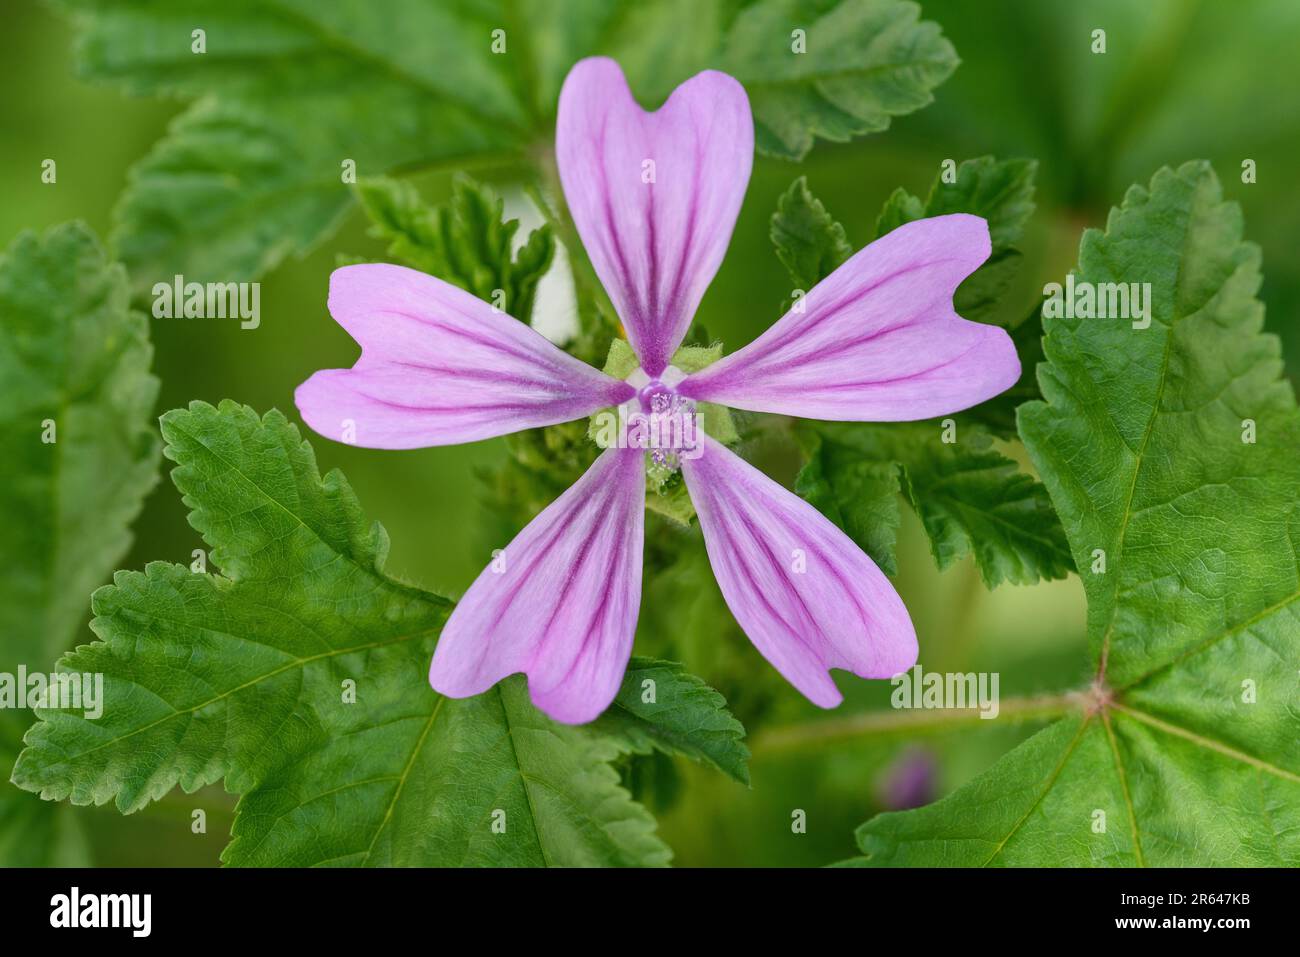 Mallow flower in the garden  on leaves background Stock Photo